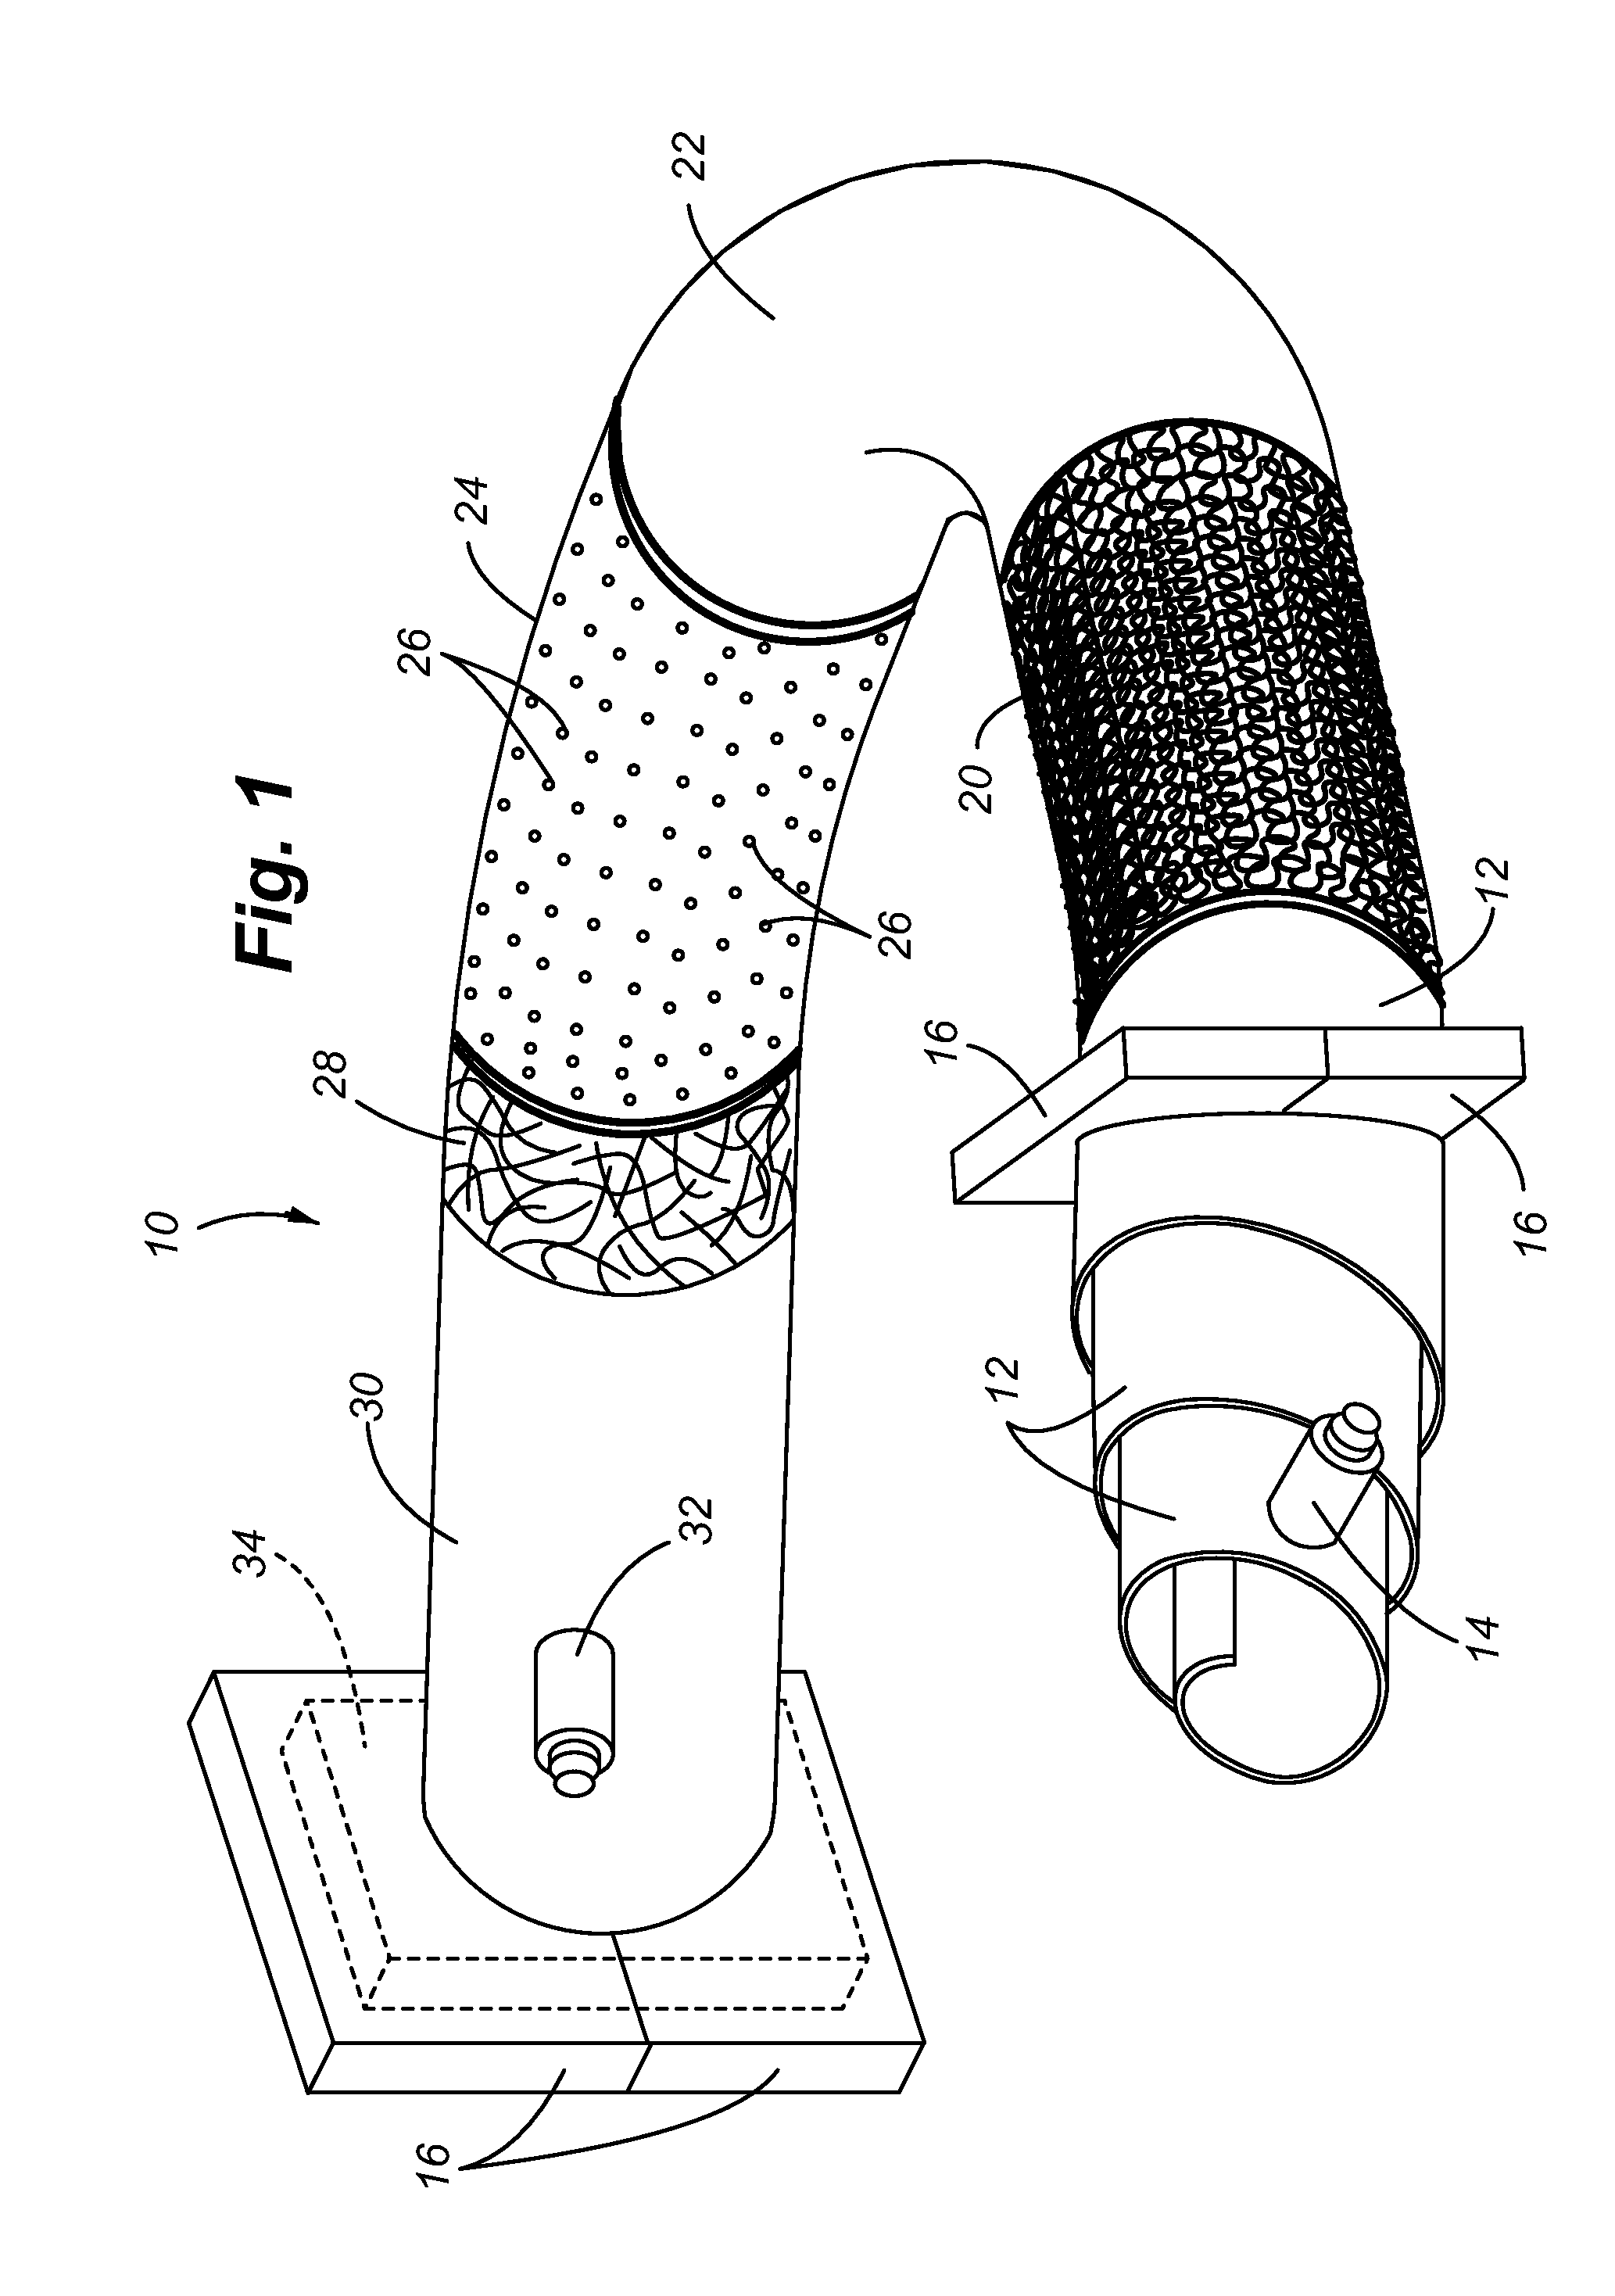 Composite tube for fluid delivery system